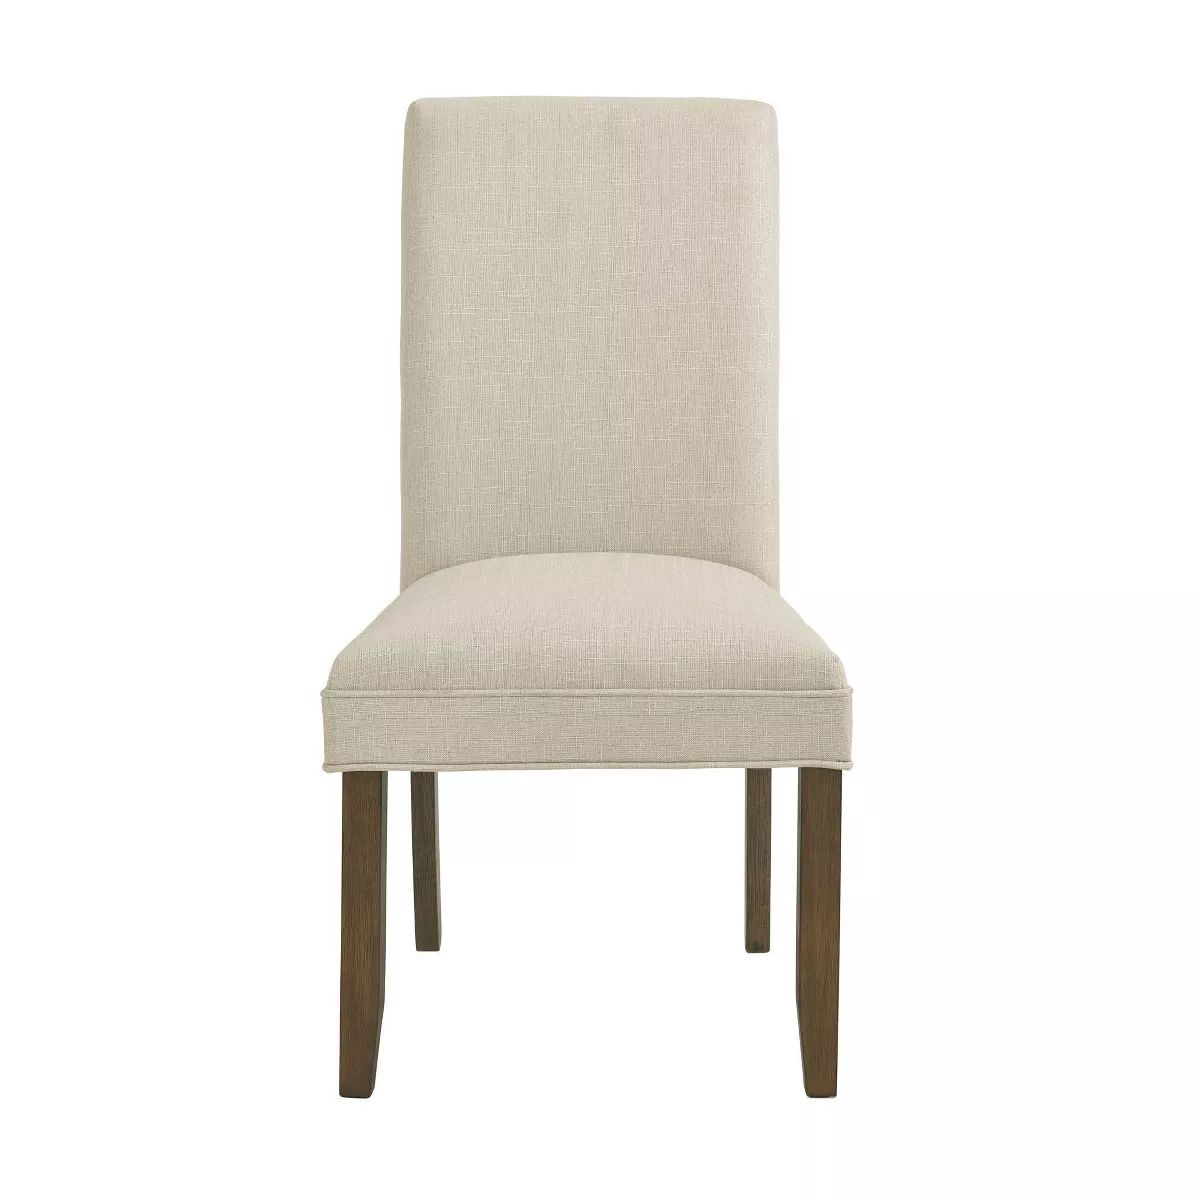 Set of 2 Gwyn Parsons Upholstered Armless Chairs - Alaterre Furniture | Target